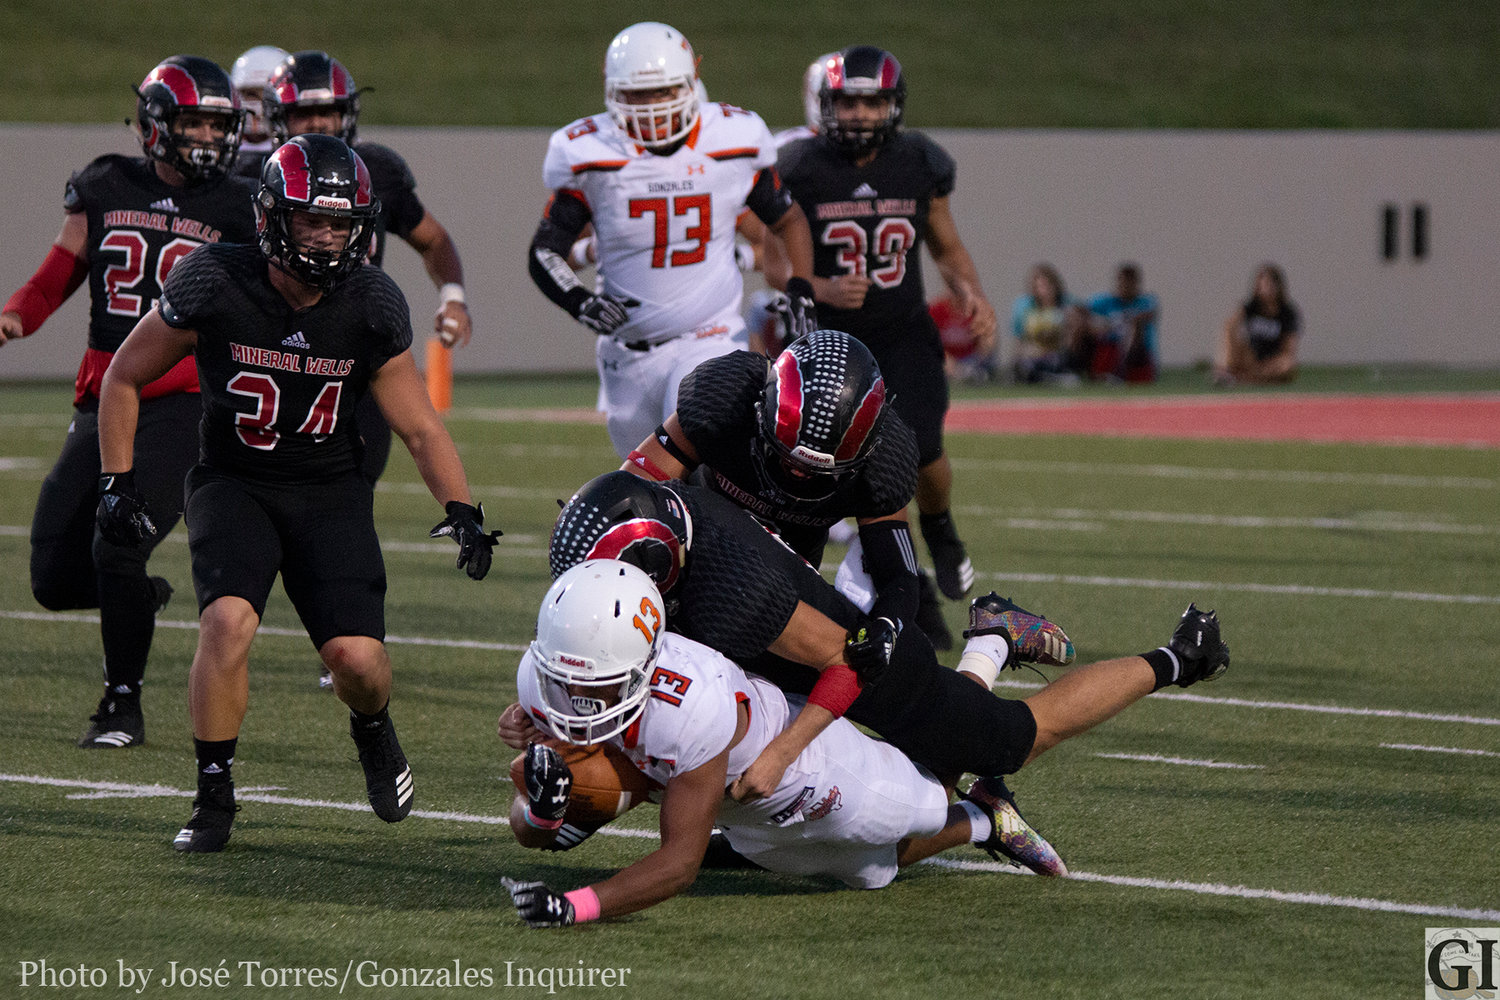 James Martinez (13) gets tackled in the open field in Gonzales' 38-21 loss against Mineral Wells